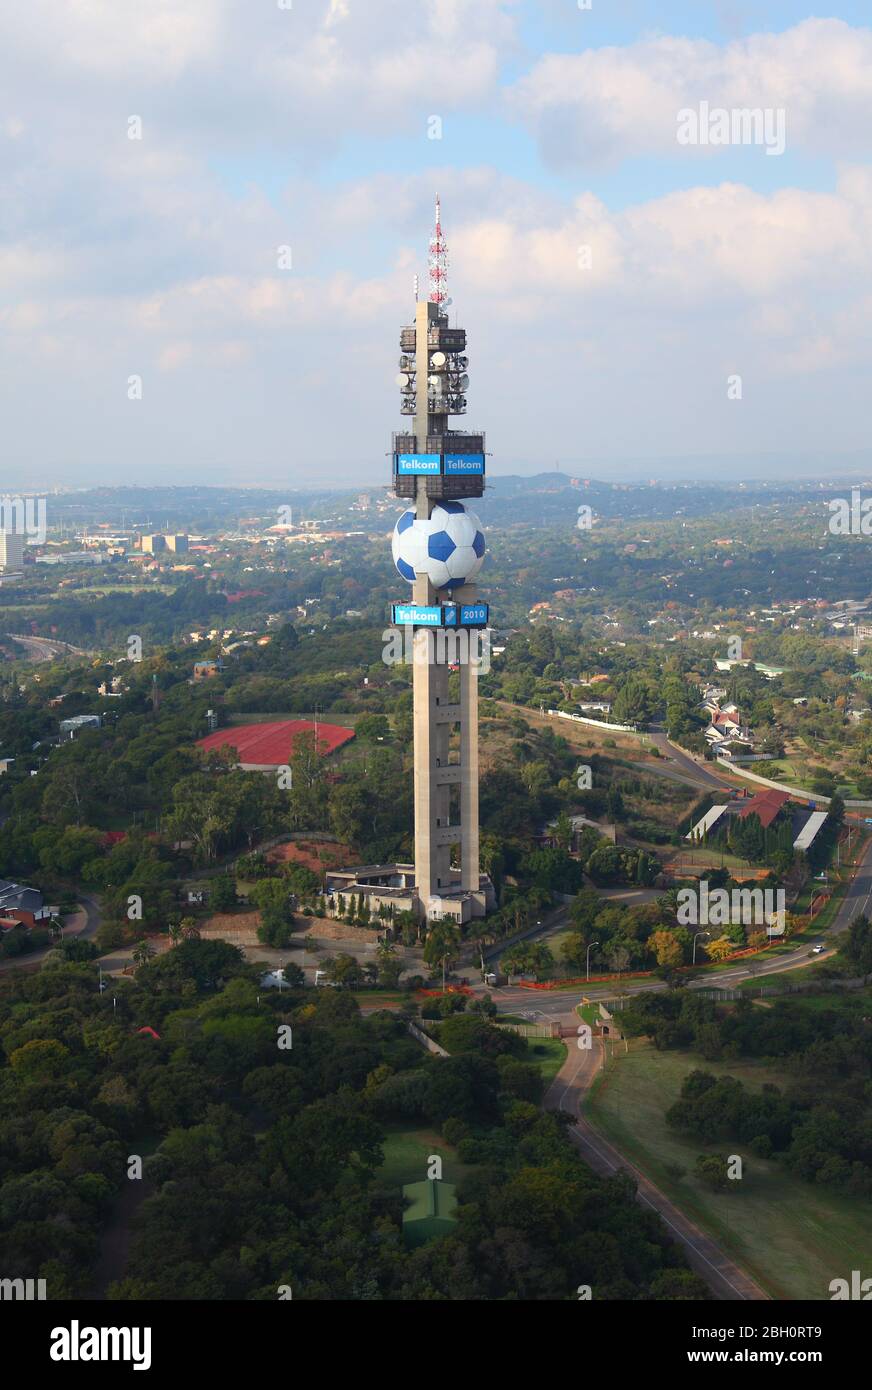 Telkom Tower Hi Res Stock Photography And Images Alamy